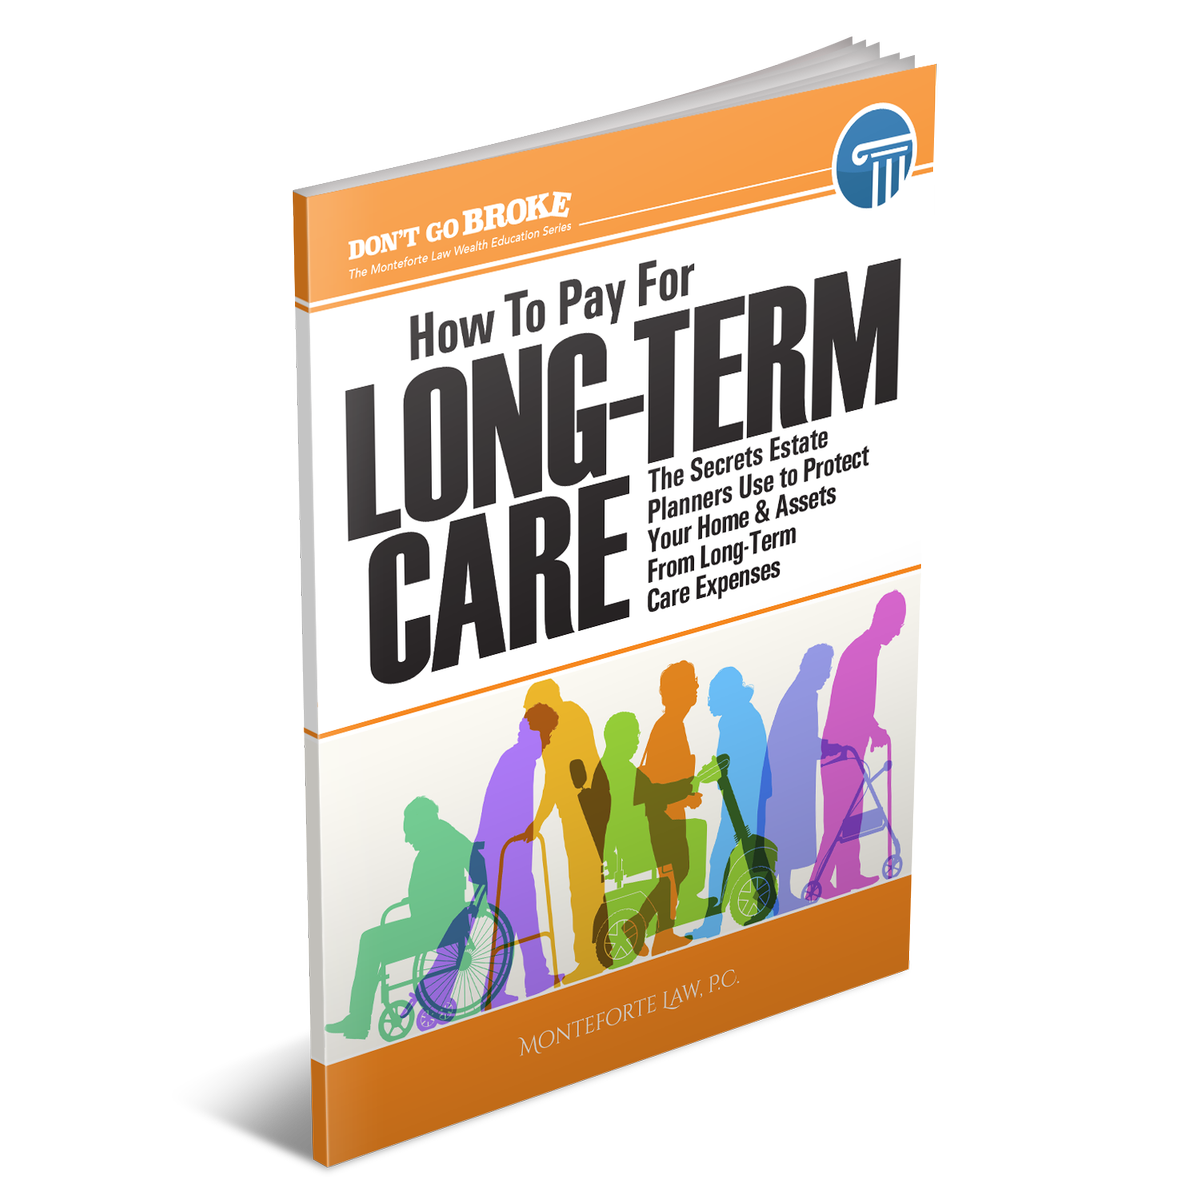 how-do-i-pay-for-long-term-care-monteforte-law-p-c